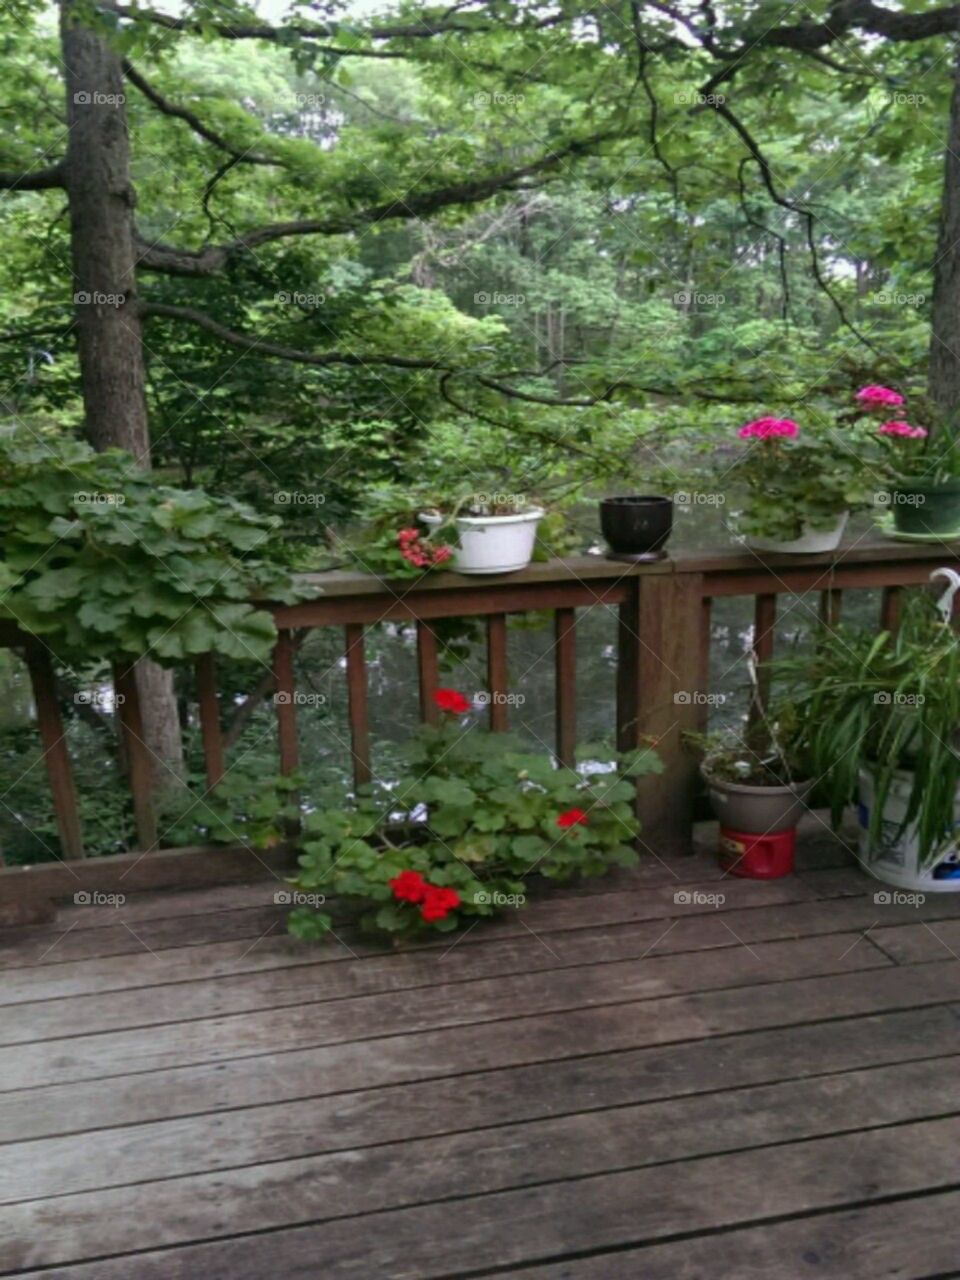 Tranquility. relaxing photo taken on the back deck overlooking the pond